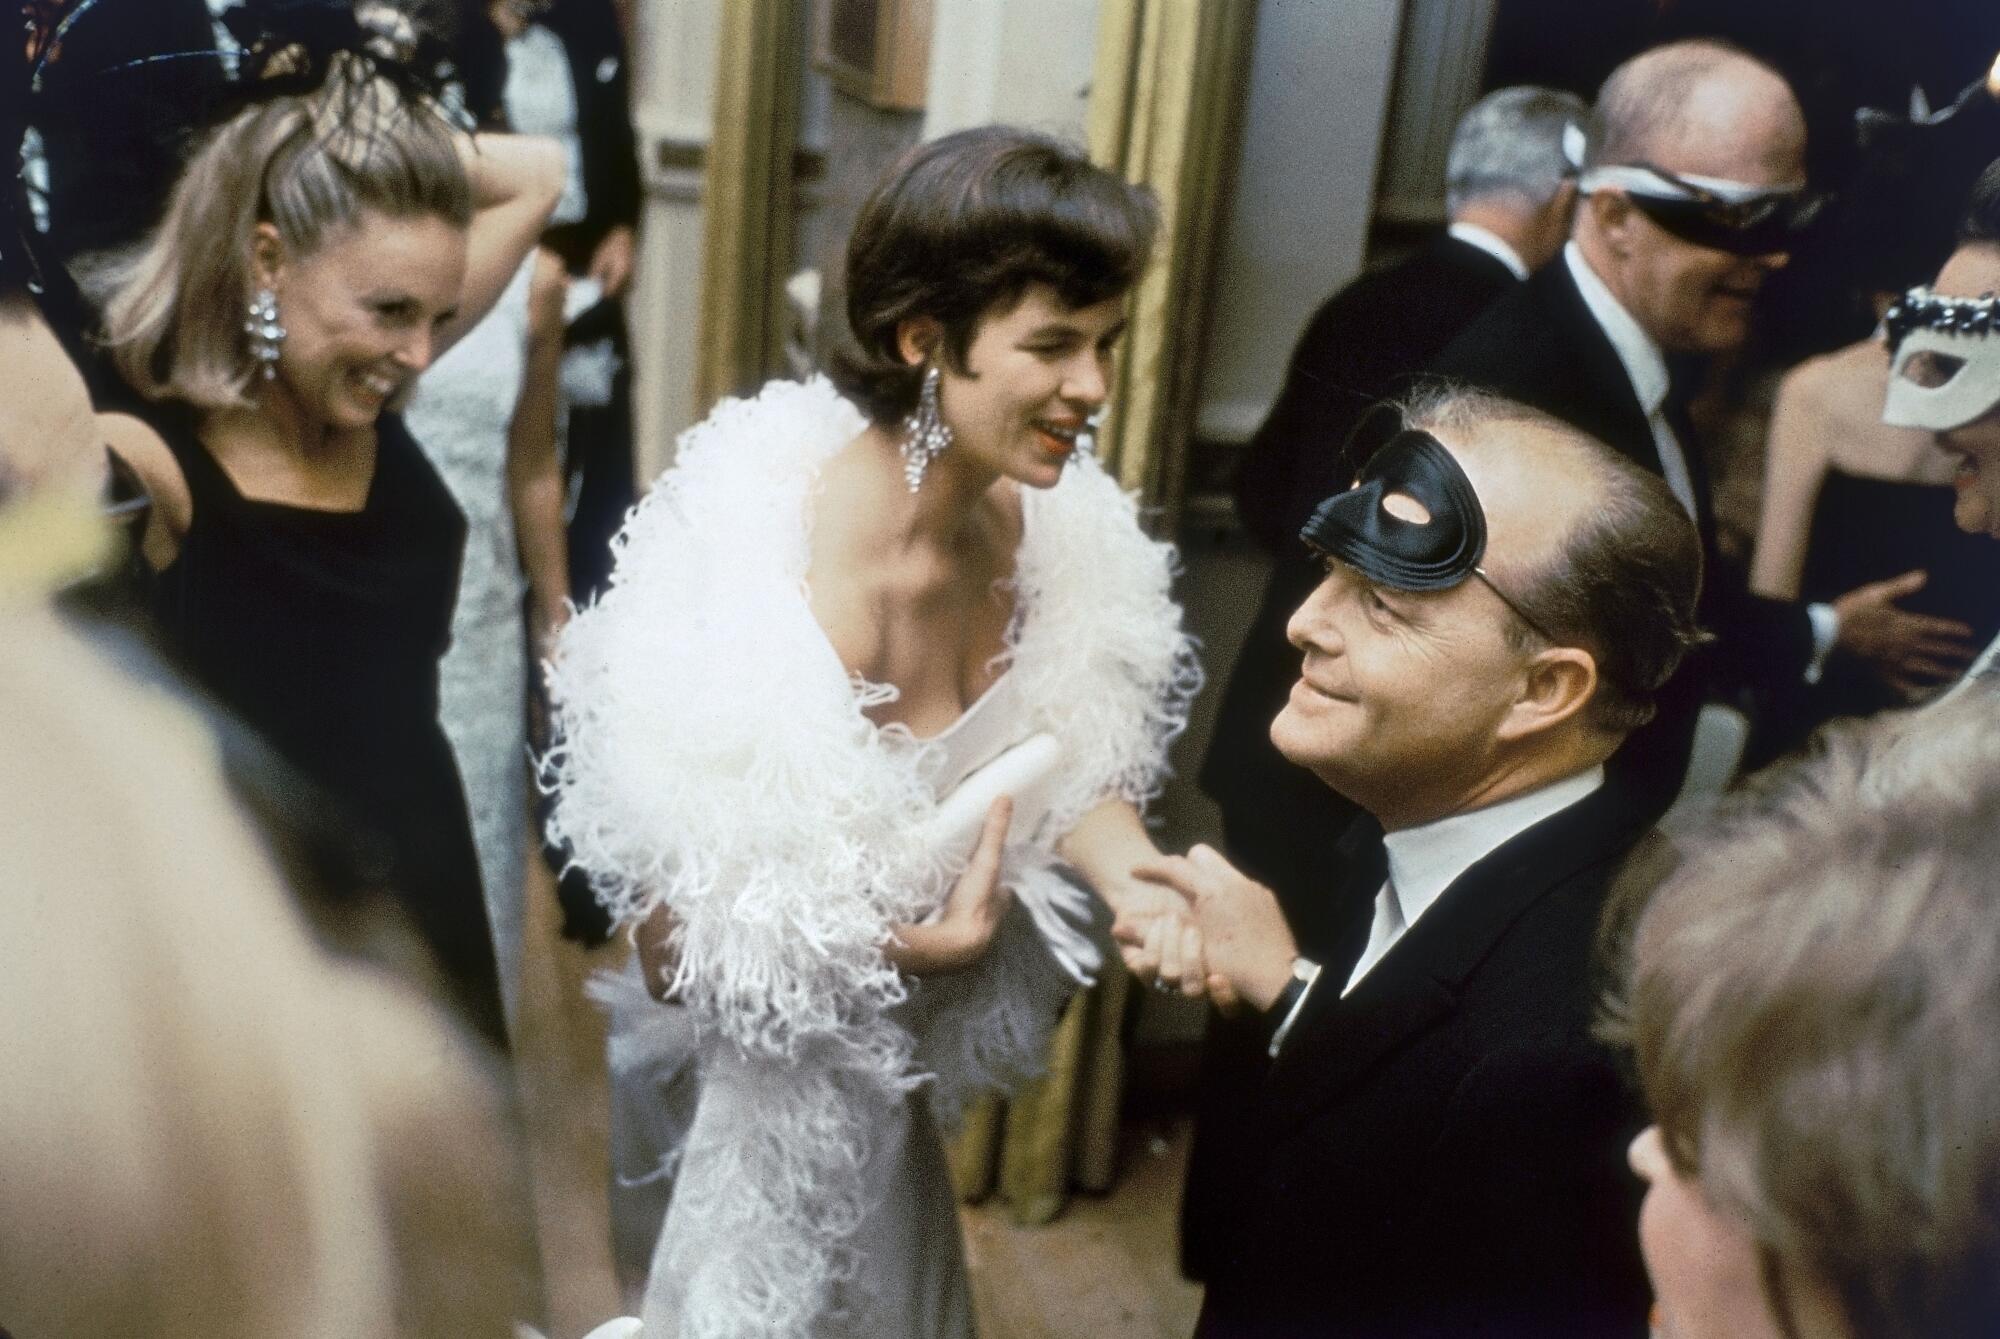 Truman Capote, with a mask resting on his forehead, greets the elegantly dressed party guests.